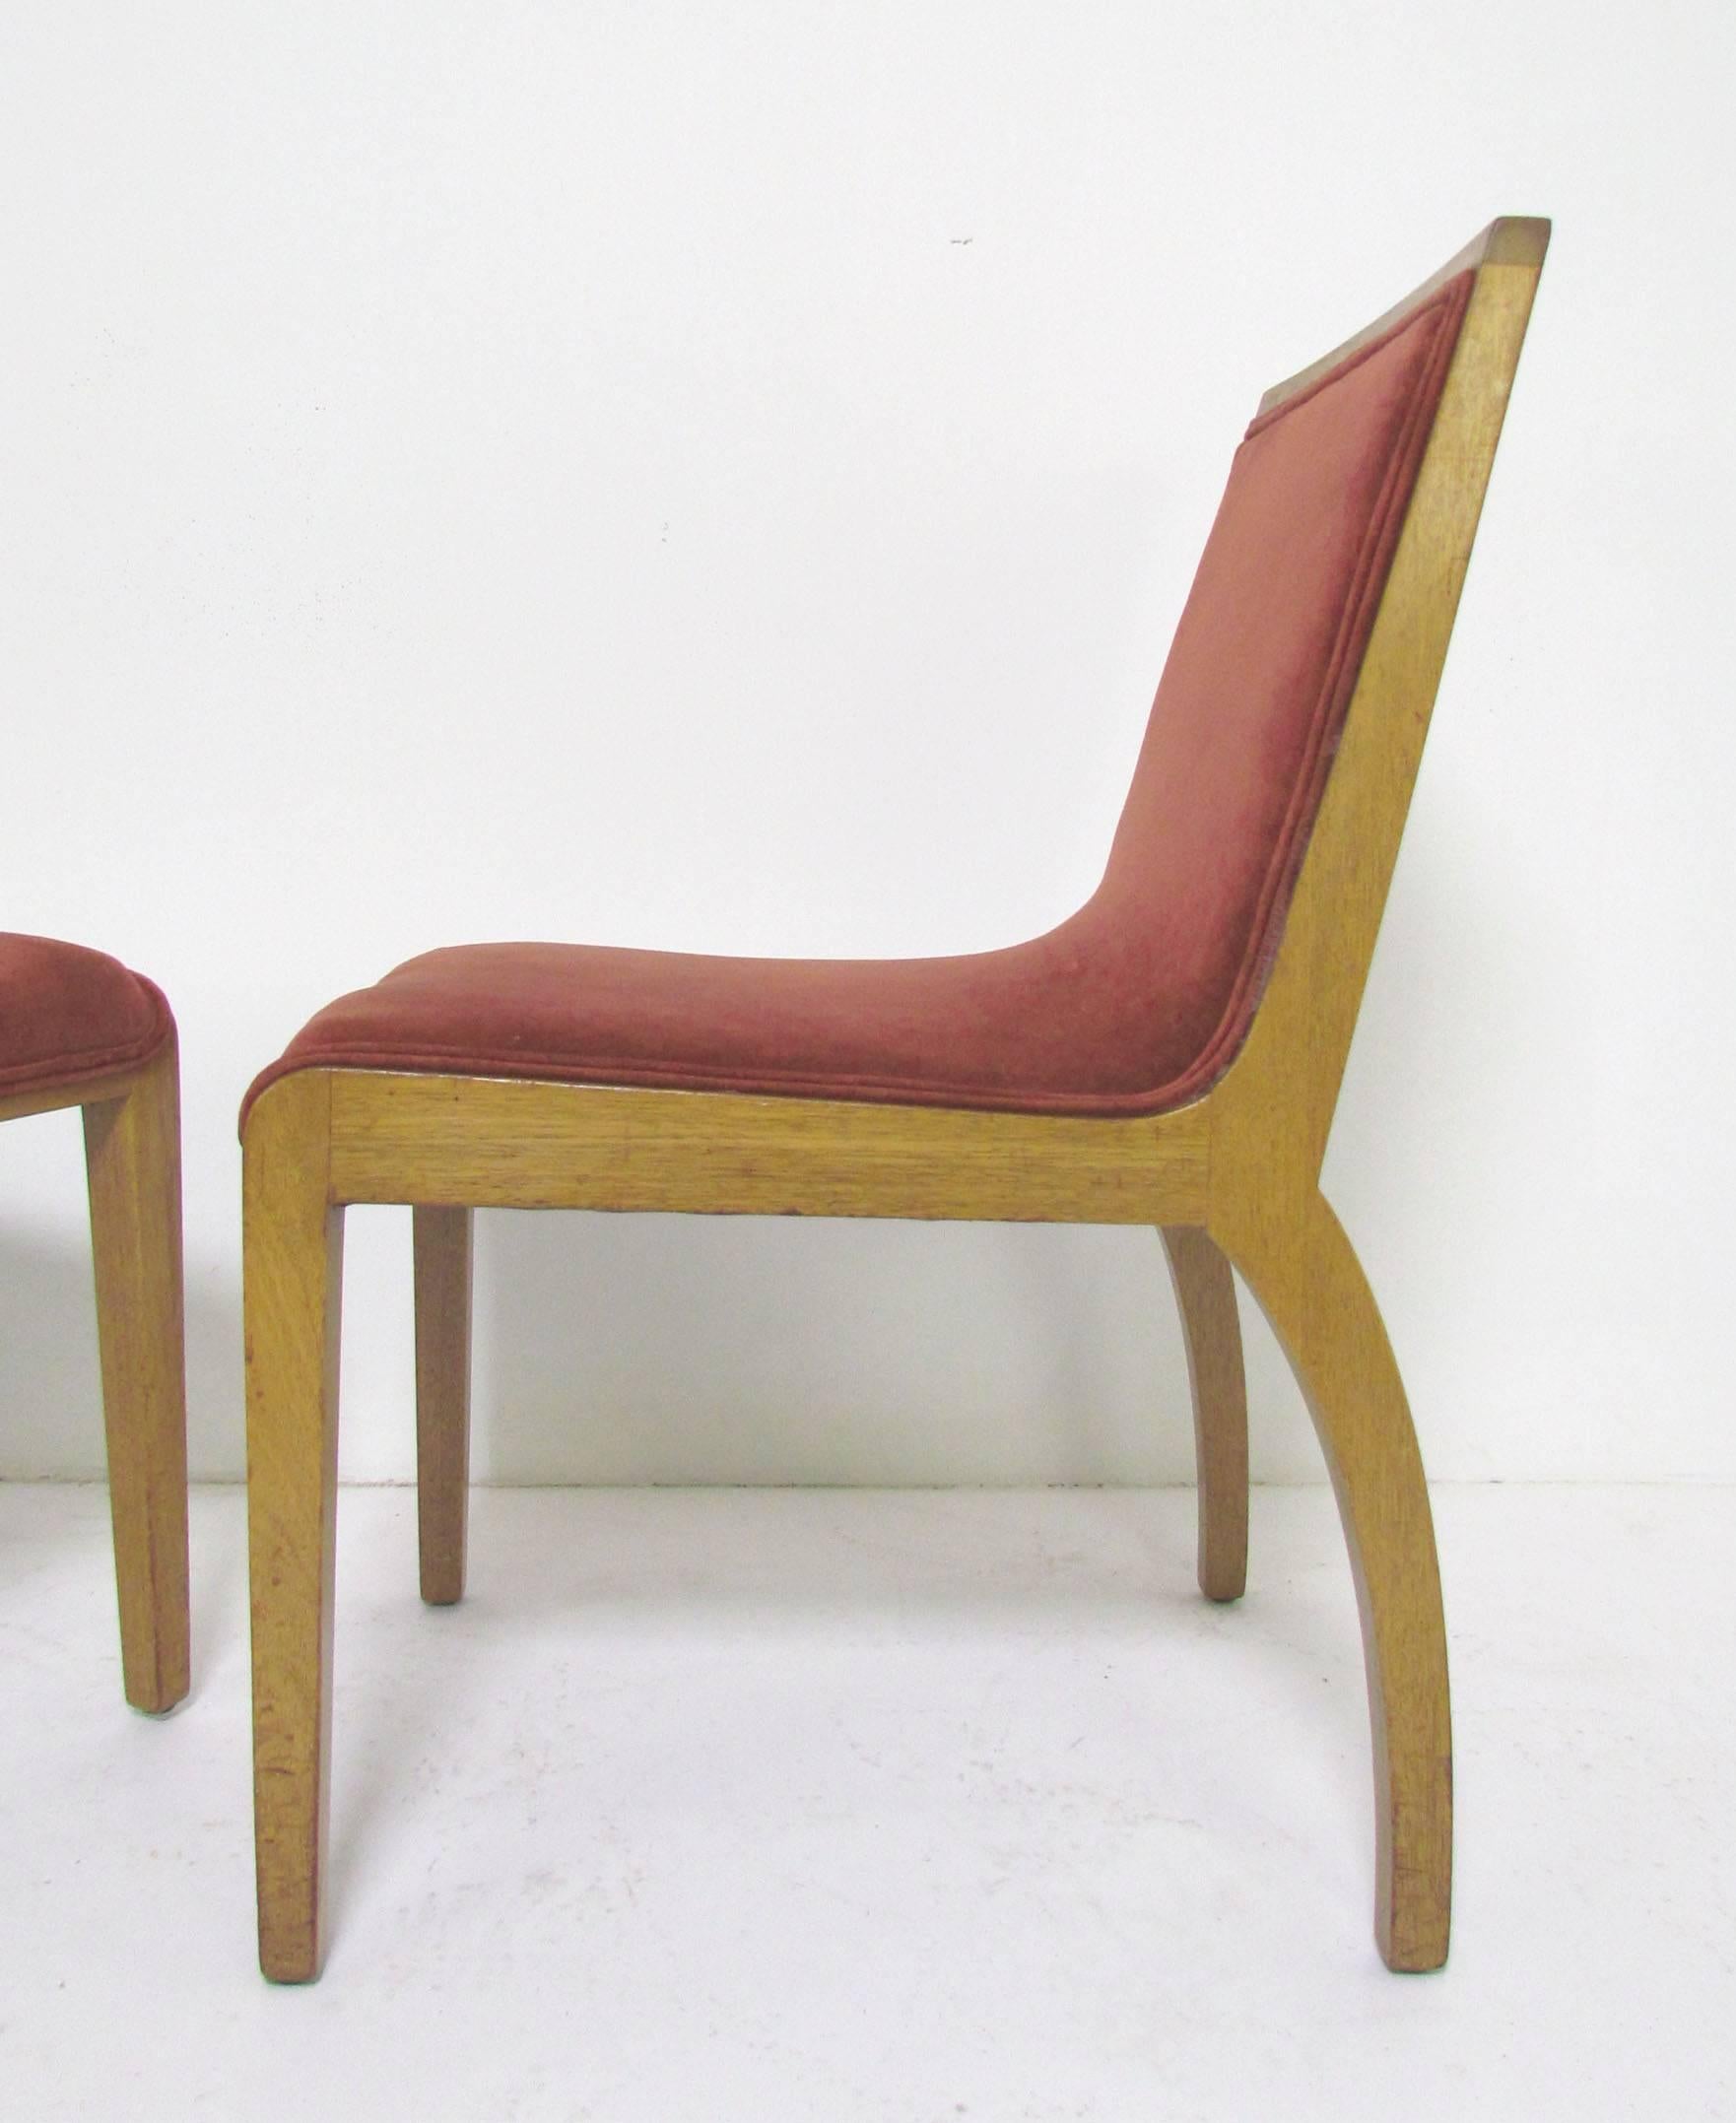 American Set of Four Panel Back Dining Chairs by Edward Wormley for Dunbar